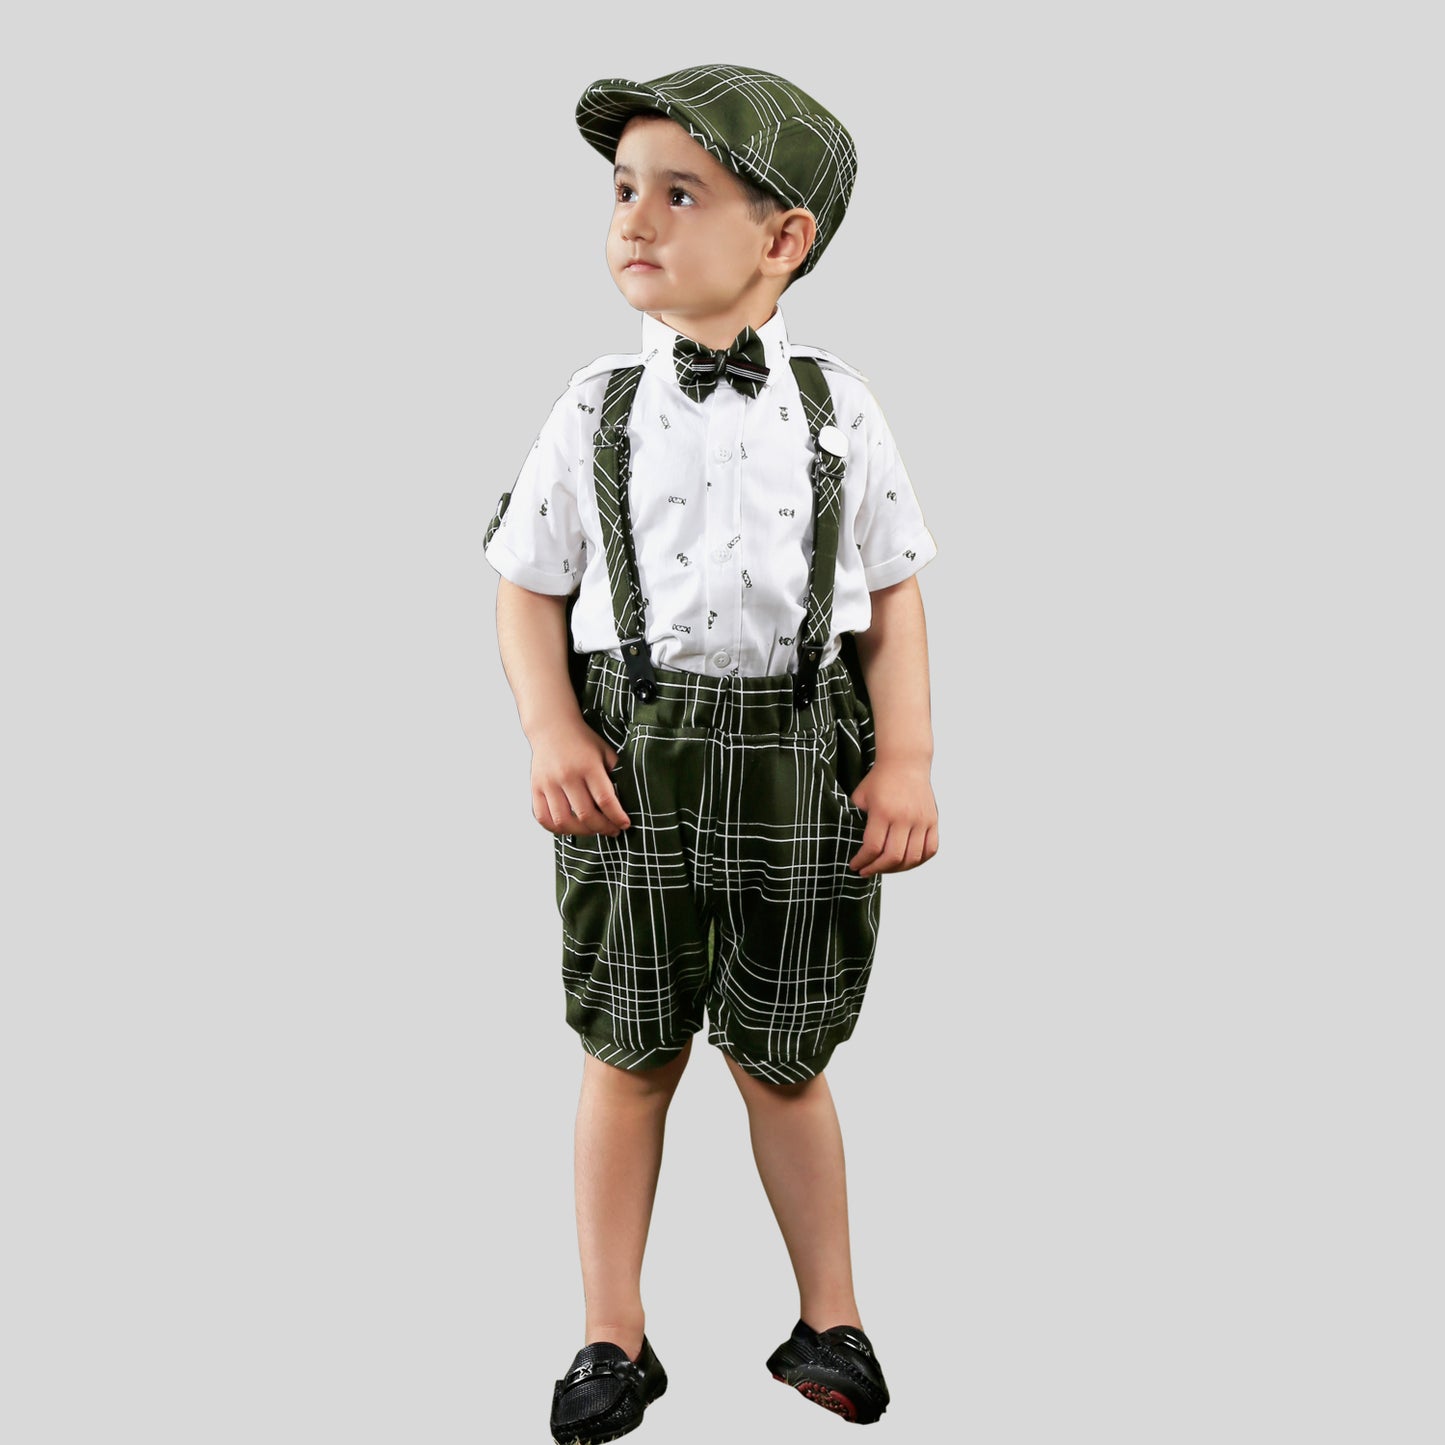 Tiny Trendsetters: Shirt, Shorts, Bow, Suspender, Cap - Party Pizzazz!